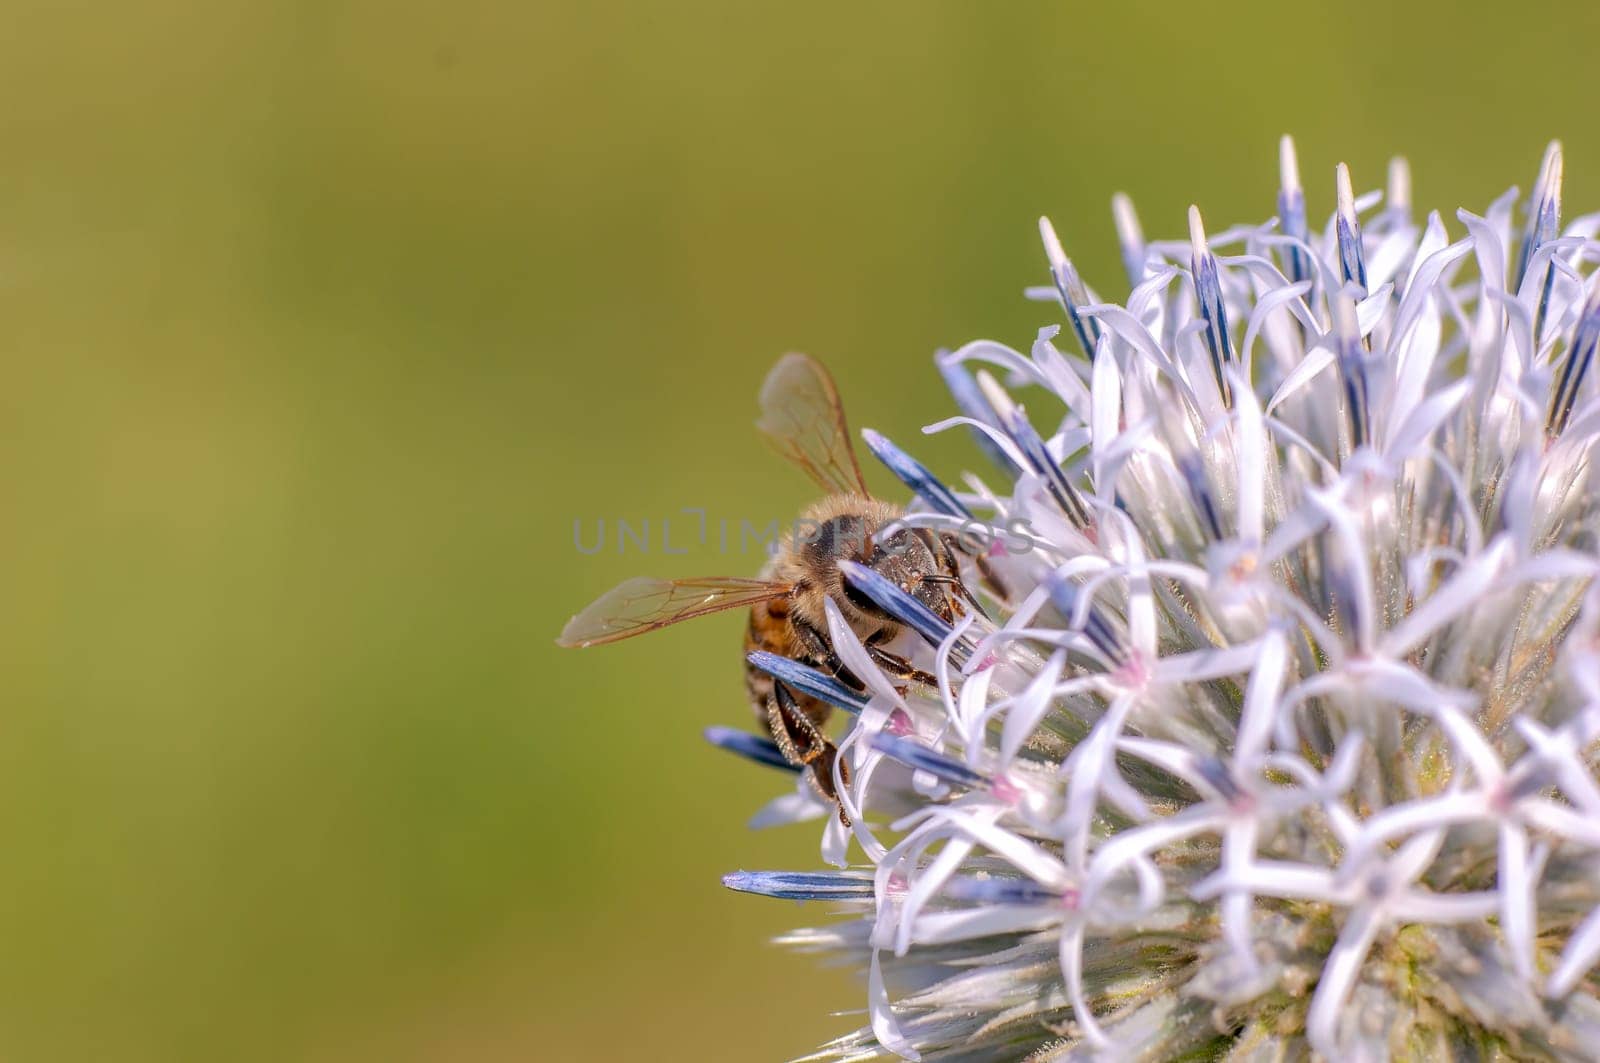 bee sits on a purple thistle flower and nibbles necktar by mario_plechaty_photography